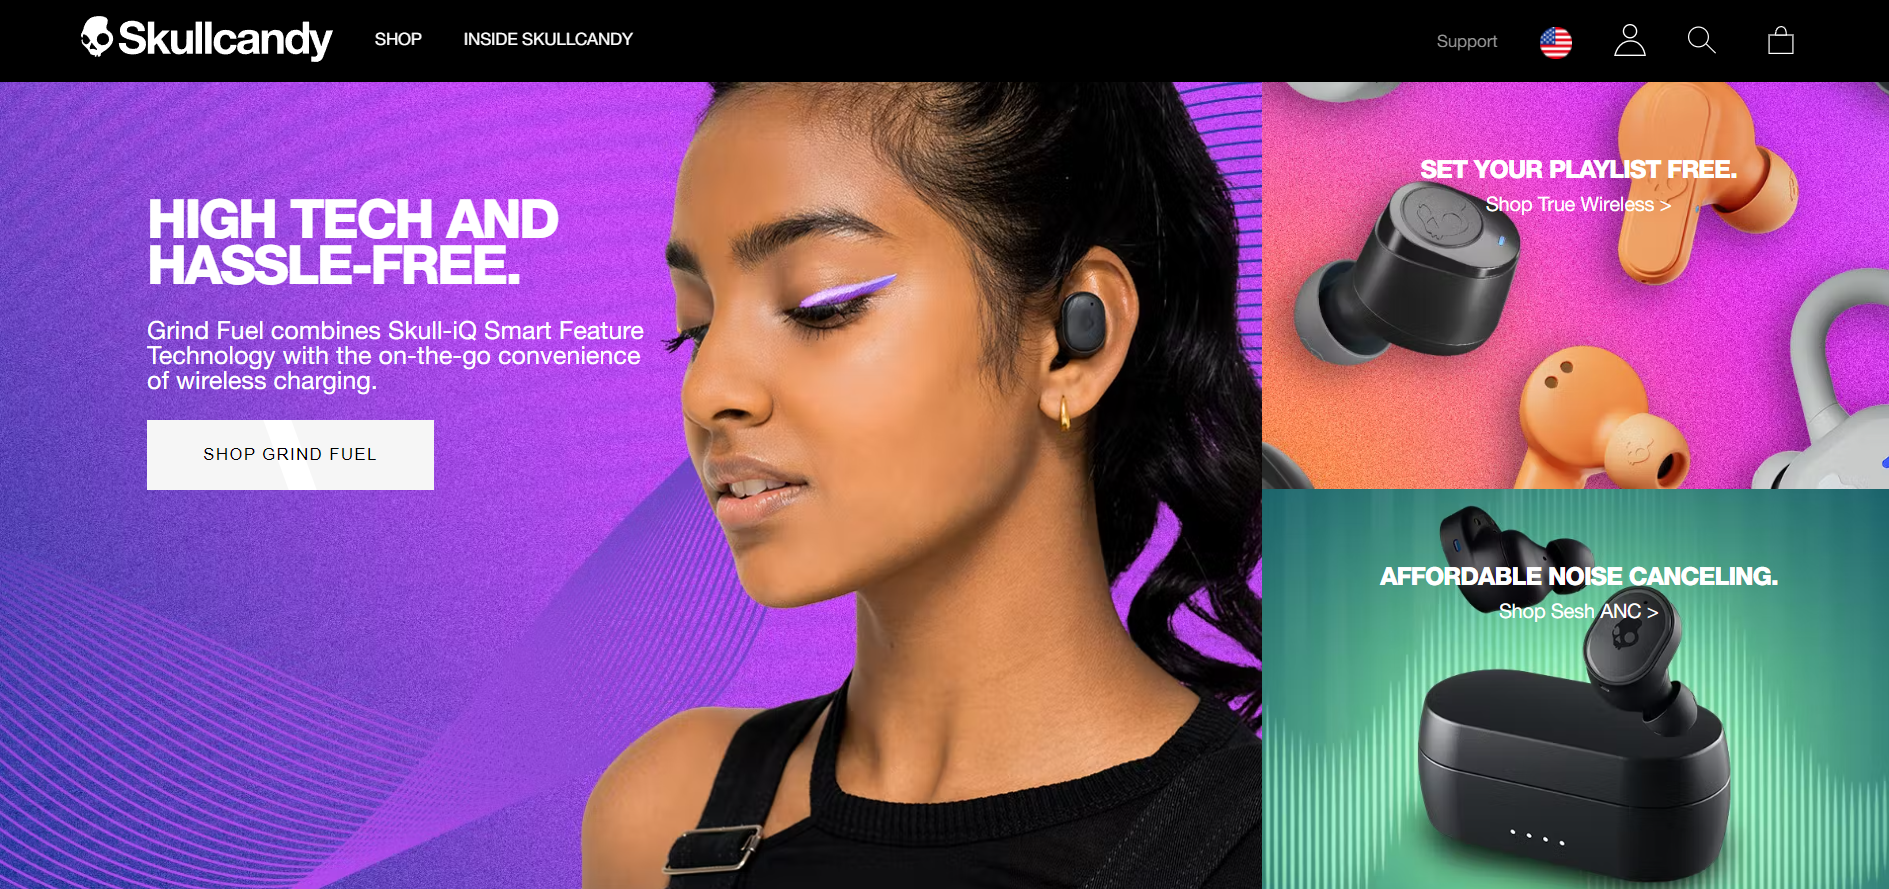 Skullcandy offers an example of headless commerce being used to creatively showcase products to the brand’s user community